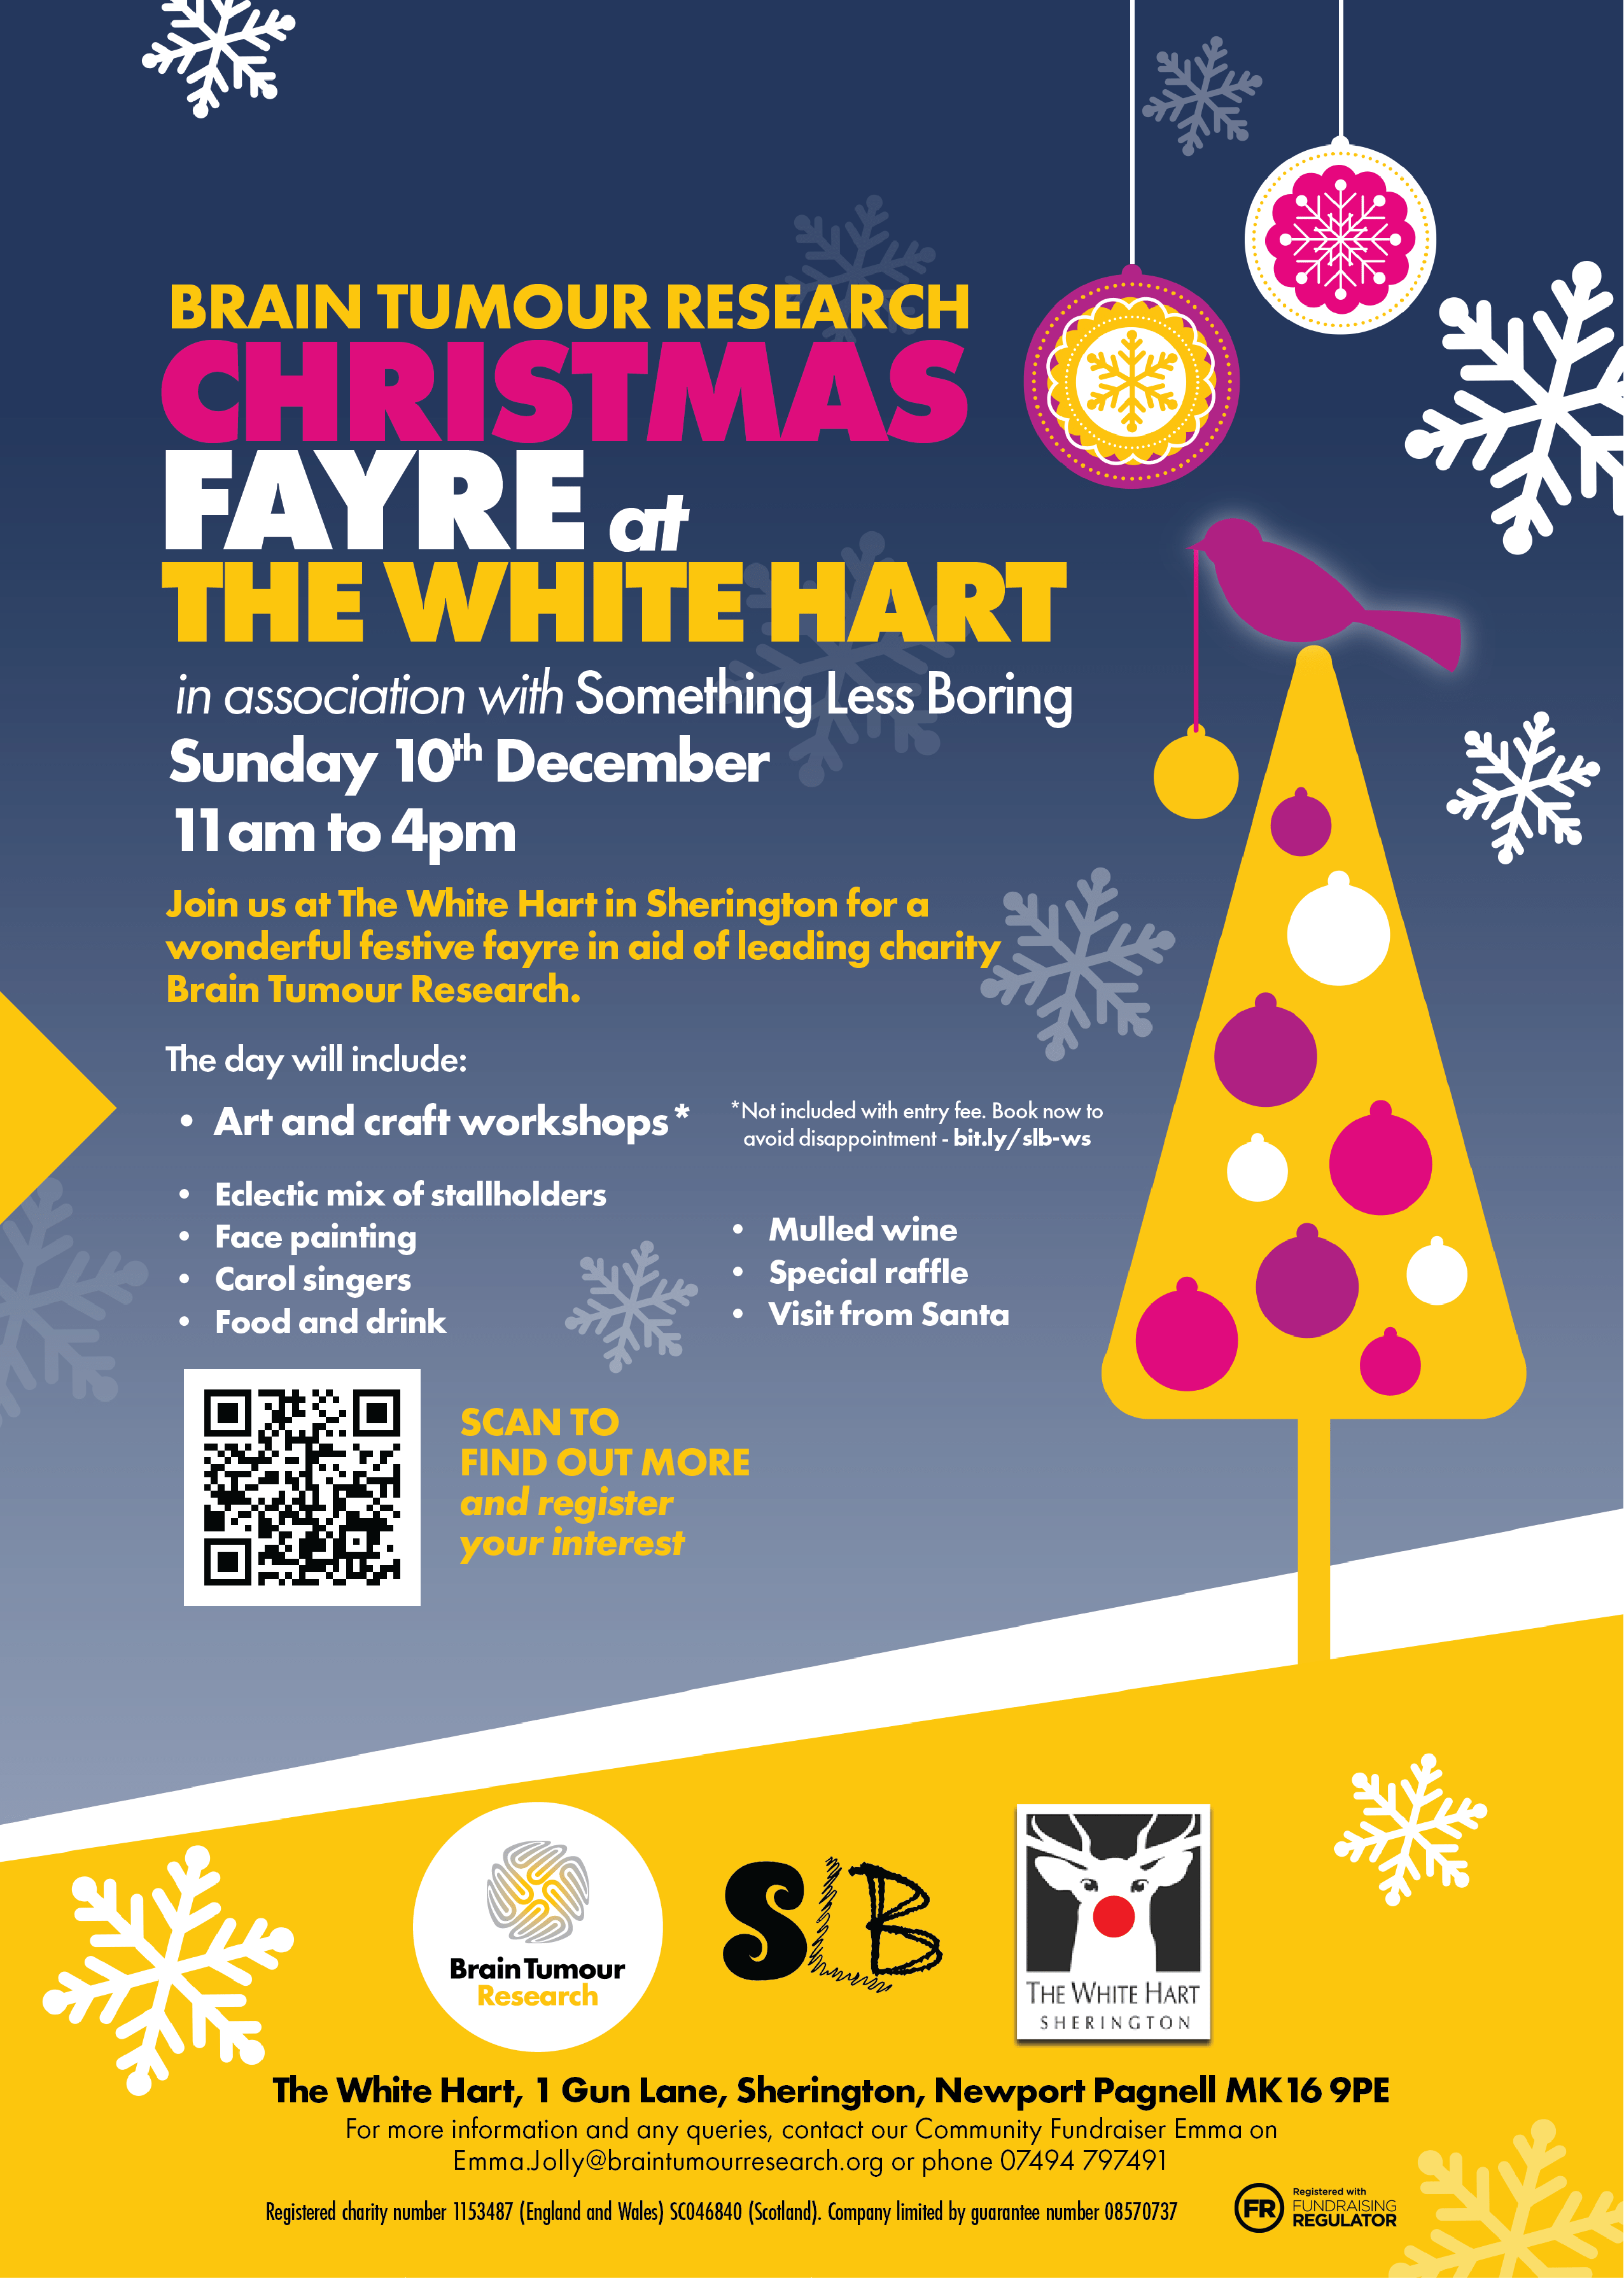 Brain Tumour Research Christmas Fayre at The White Hart in association with Something Less Boring